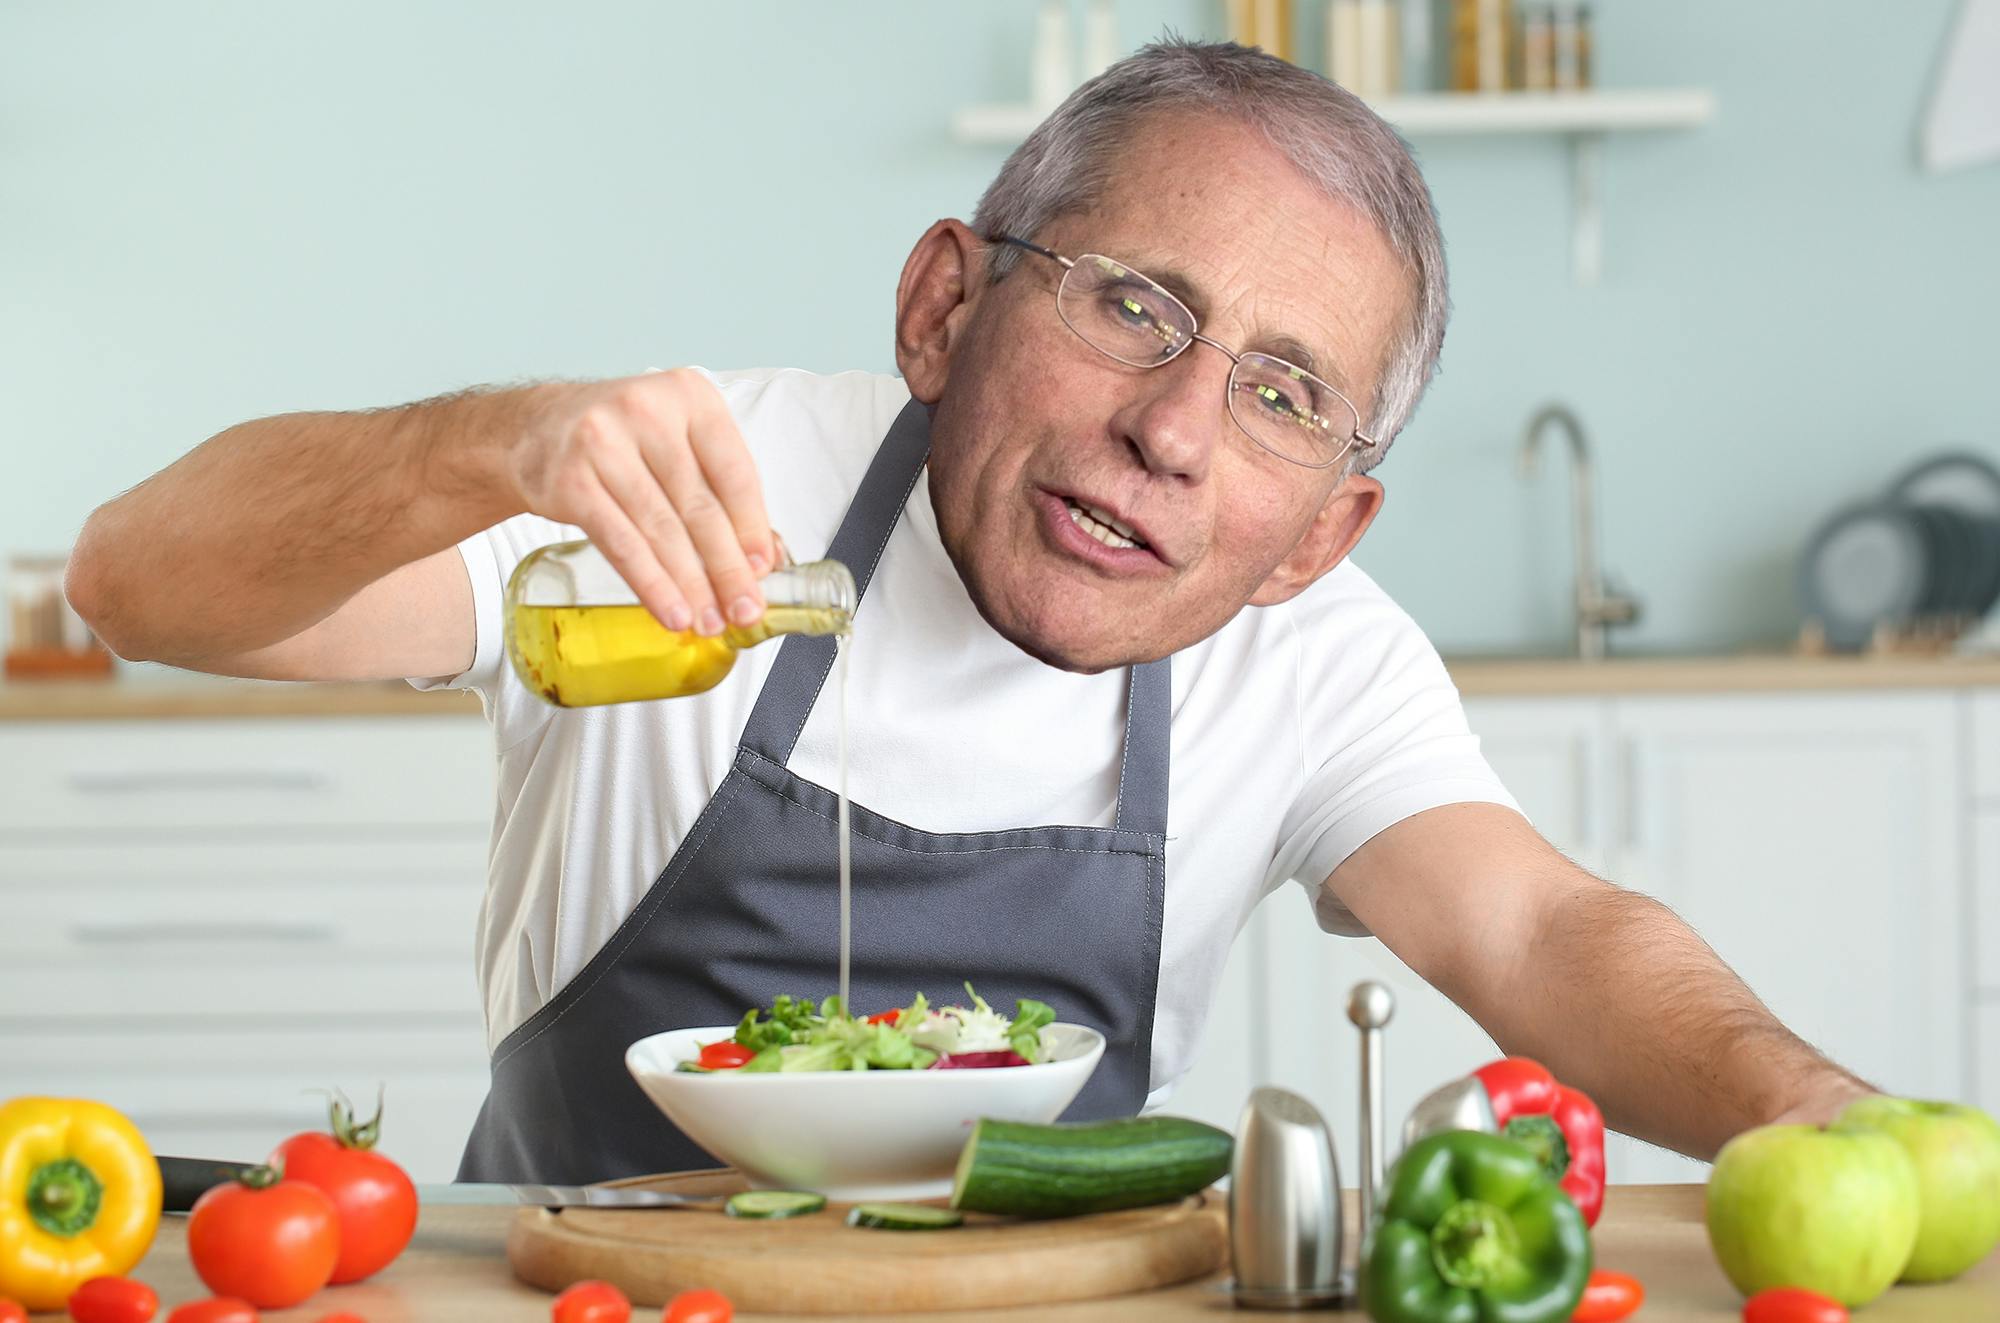 A doctored image of Anthony Fauci pouring salad dressing.